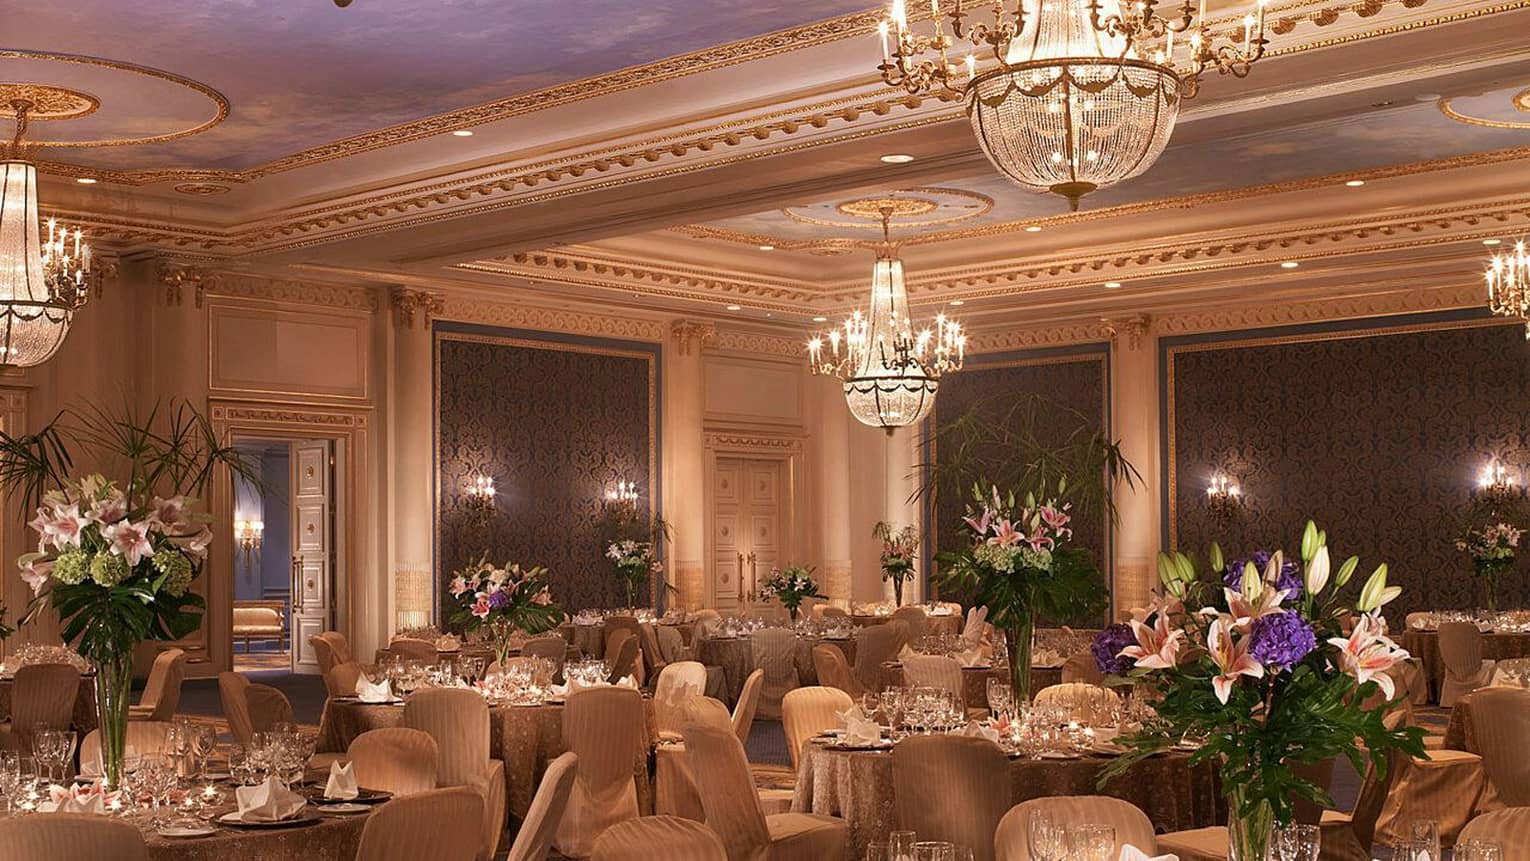 Elegantly set tables with gold tablecloths, flowers in ballroom with textured blue panels chandeliers 